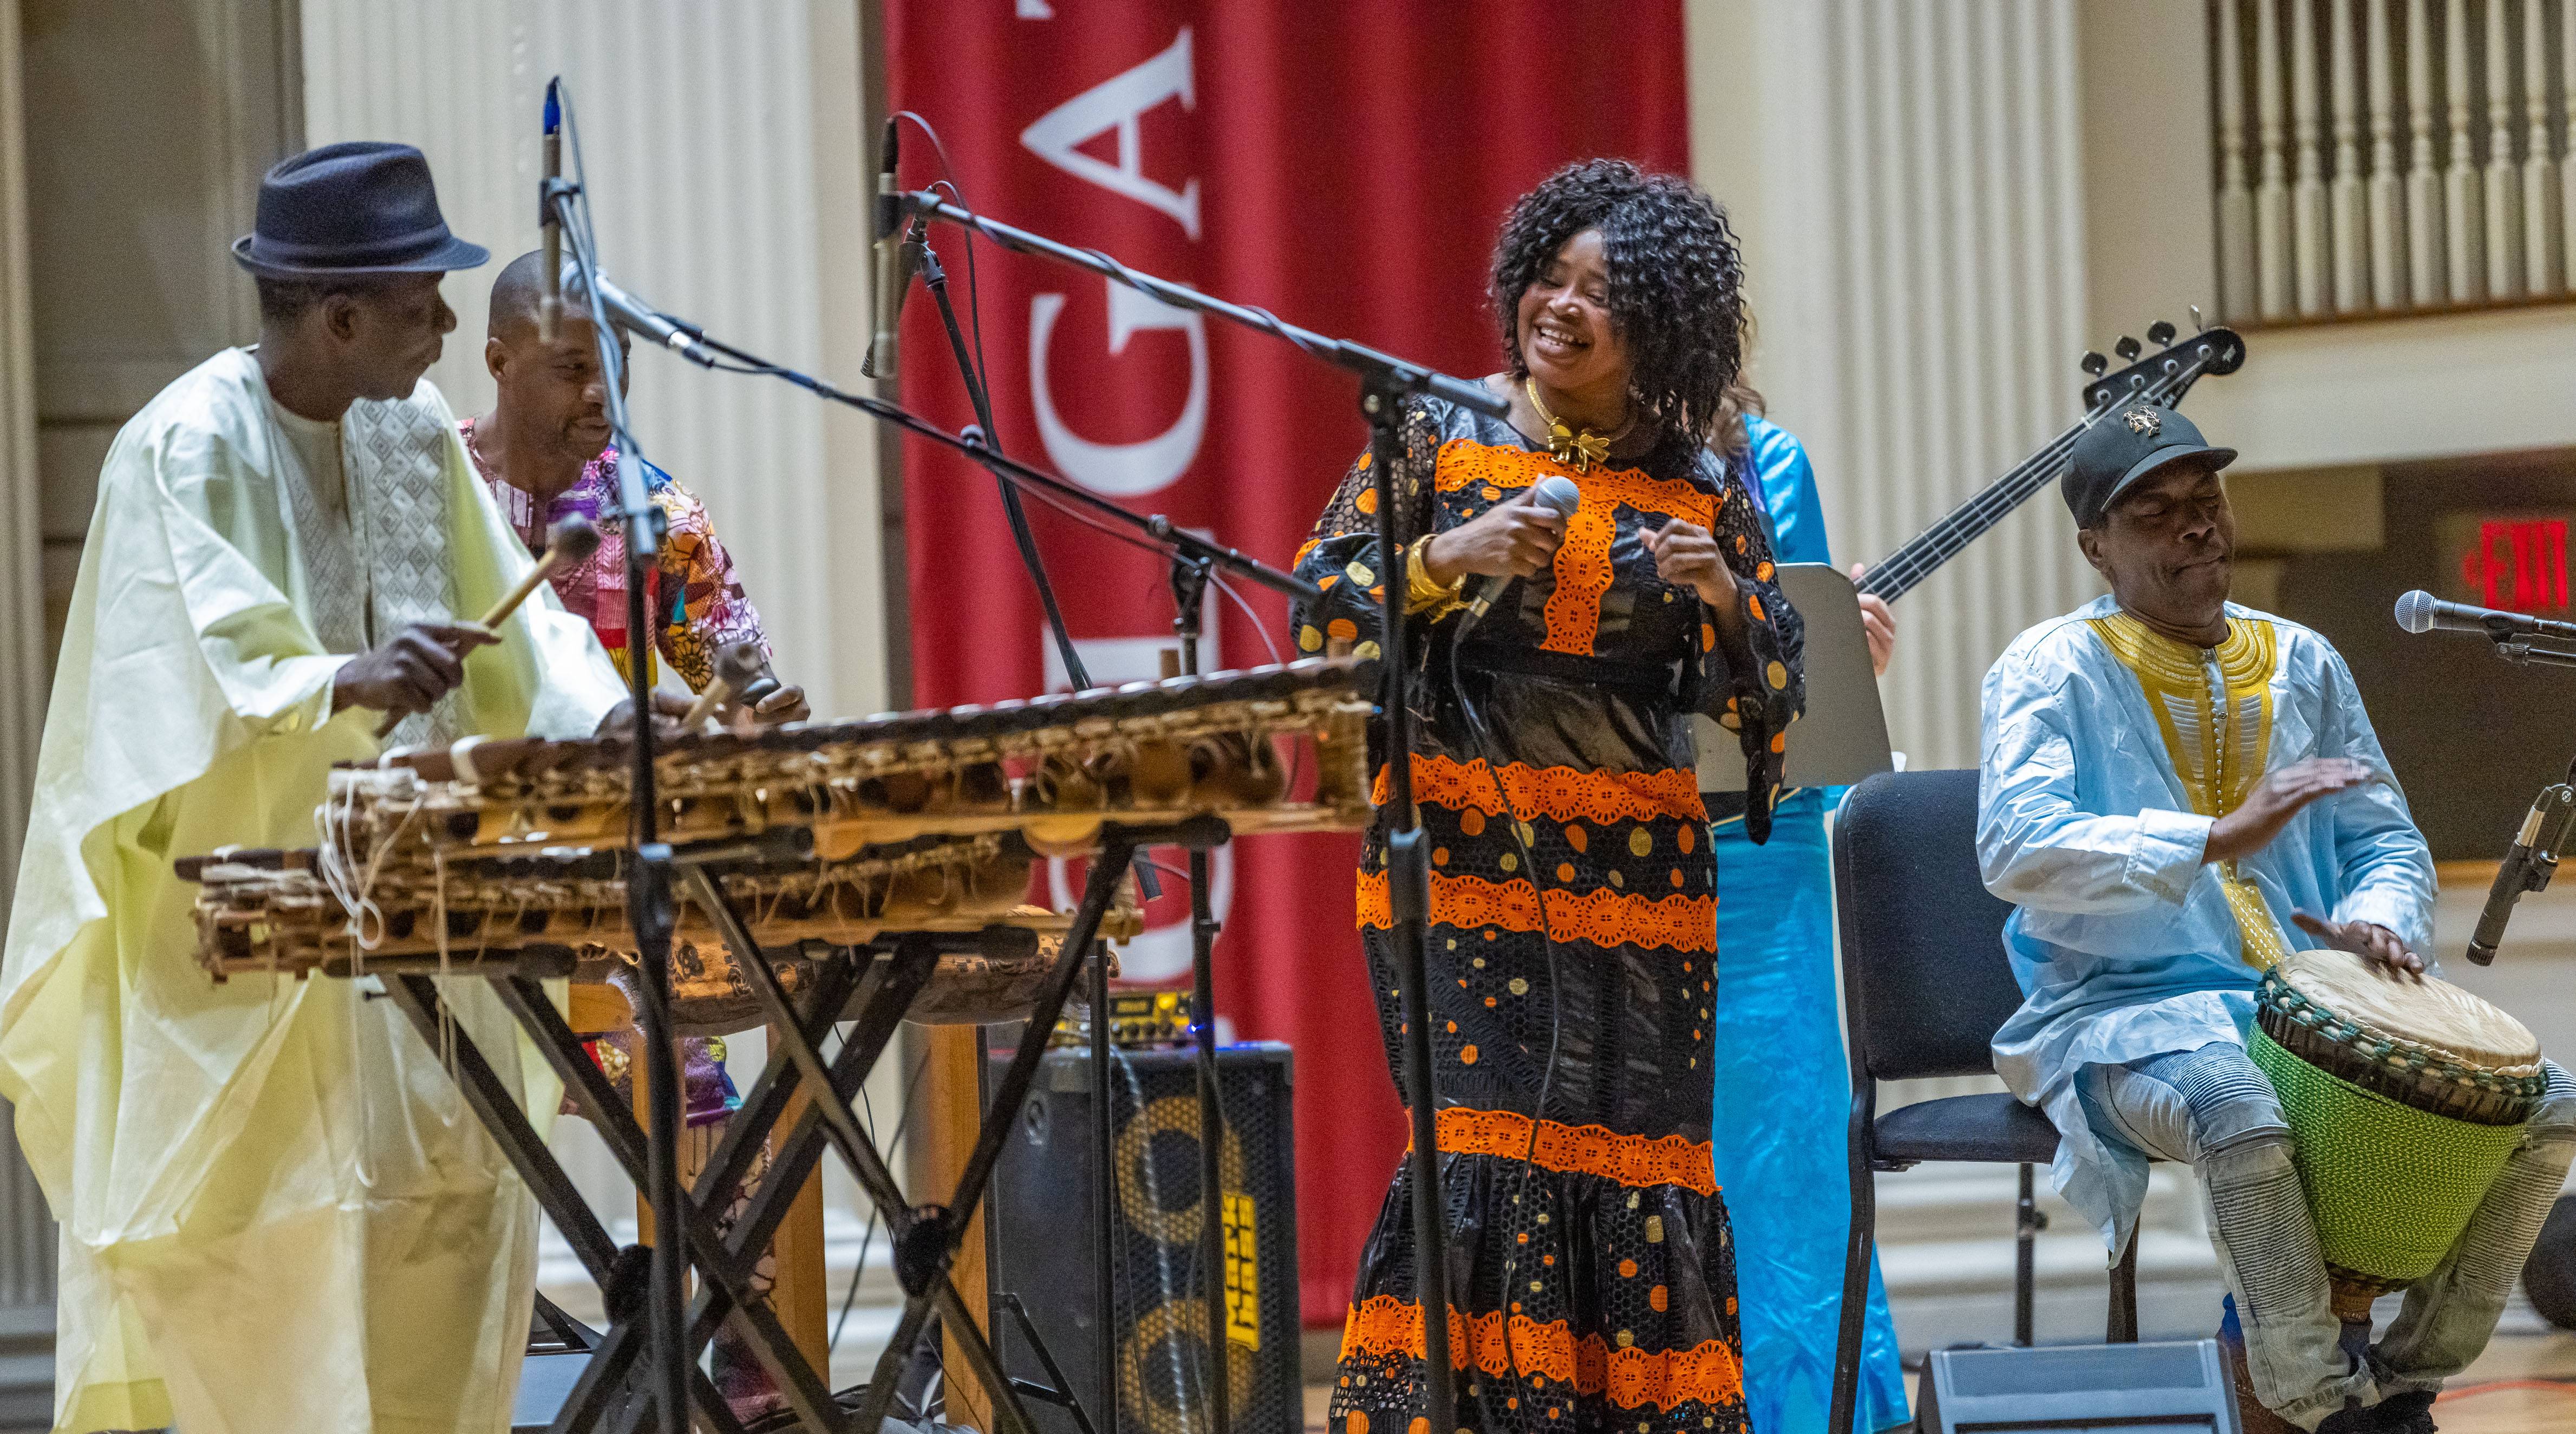 Balla Kouyaté and World Vision perform at Colgate University in February 2022